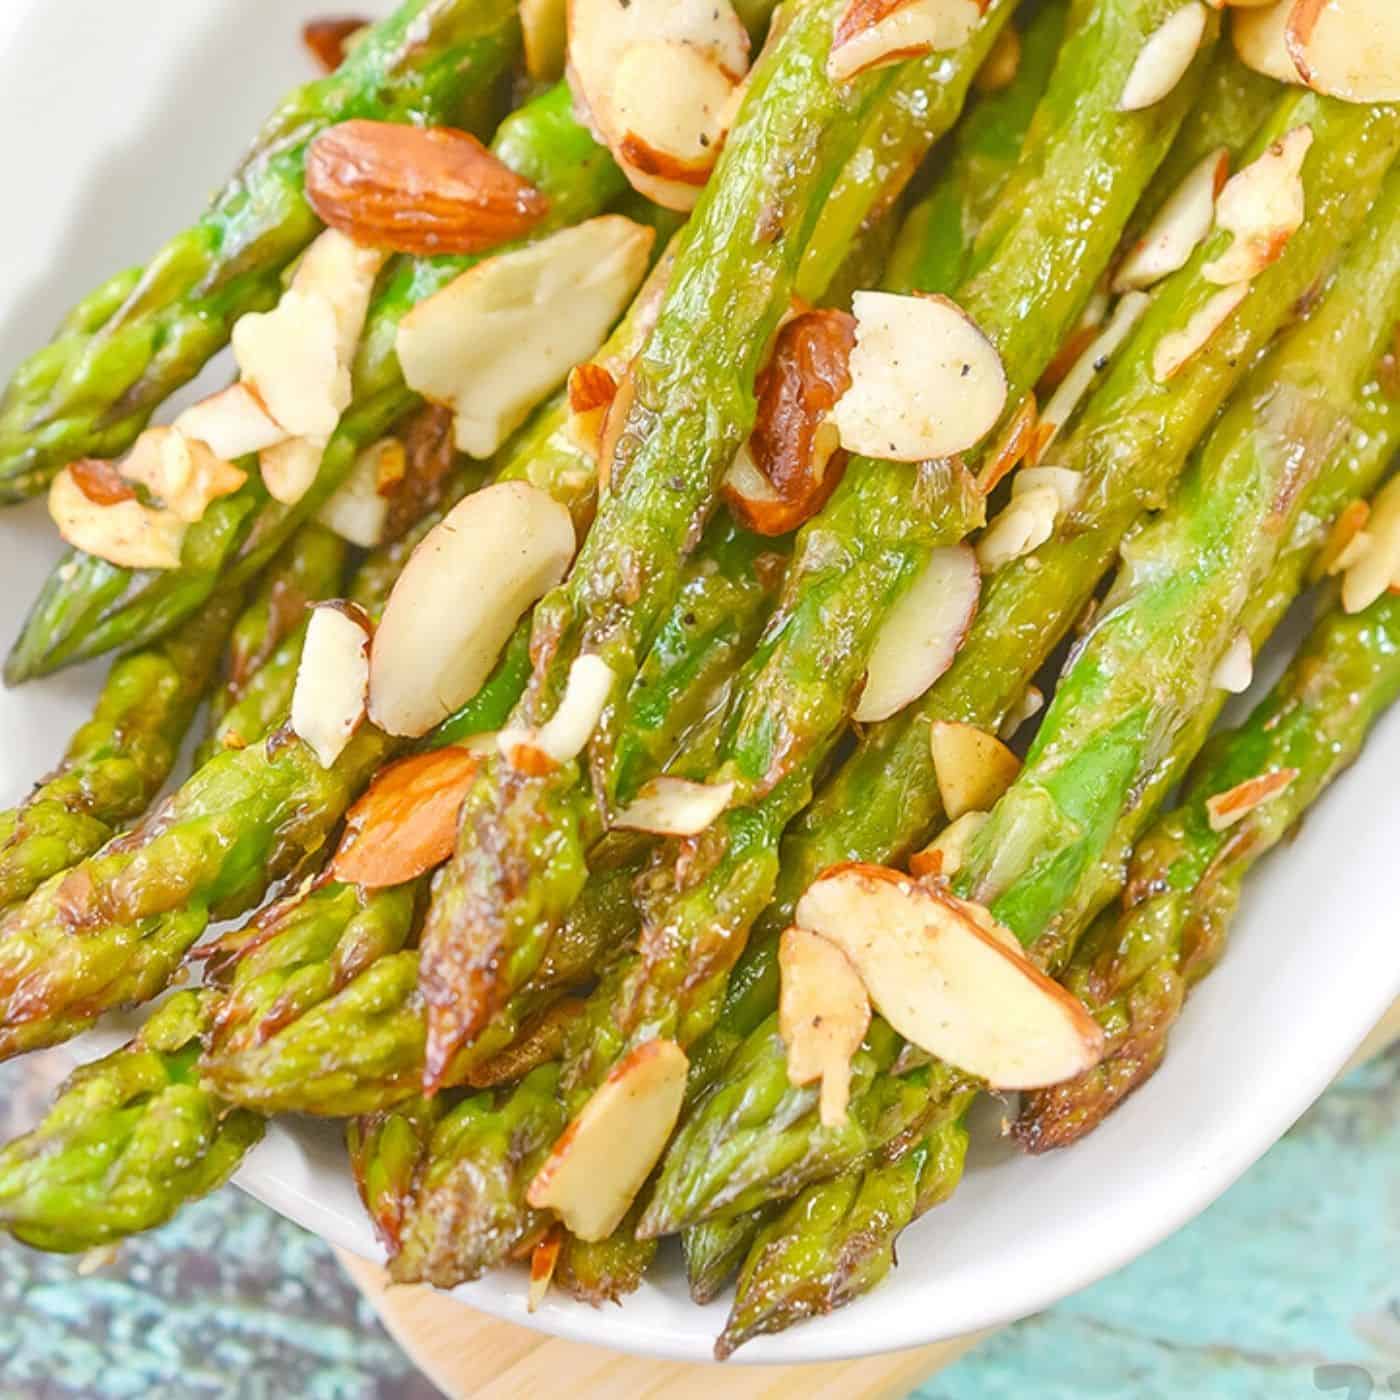 Sauteed Asparagus with almond seeds